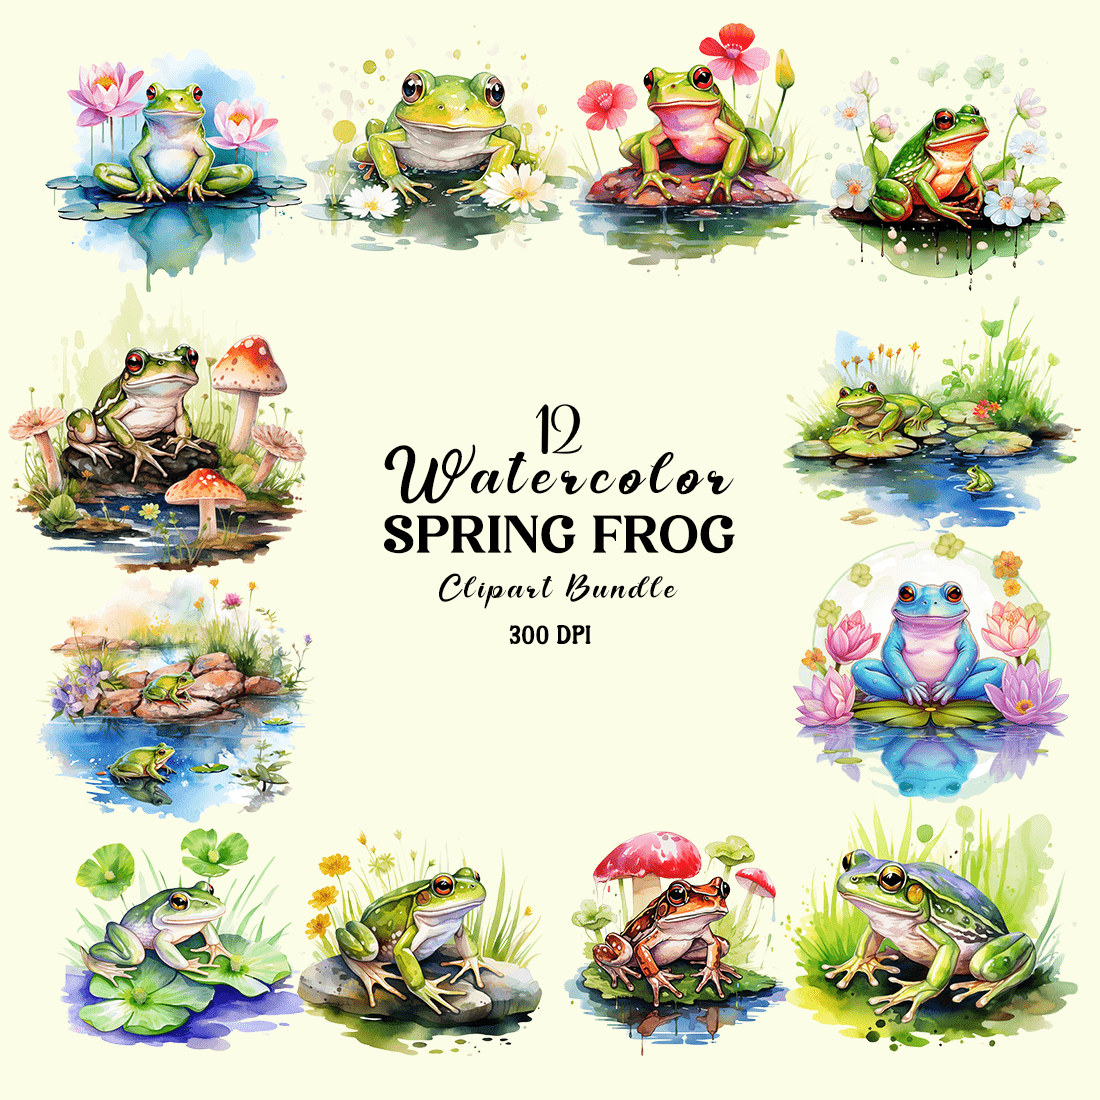 Watercolor Spring Frog Clipart Bundle cover image.